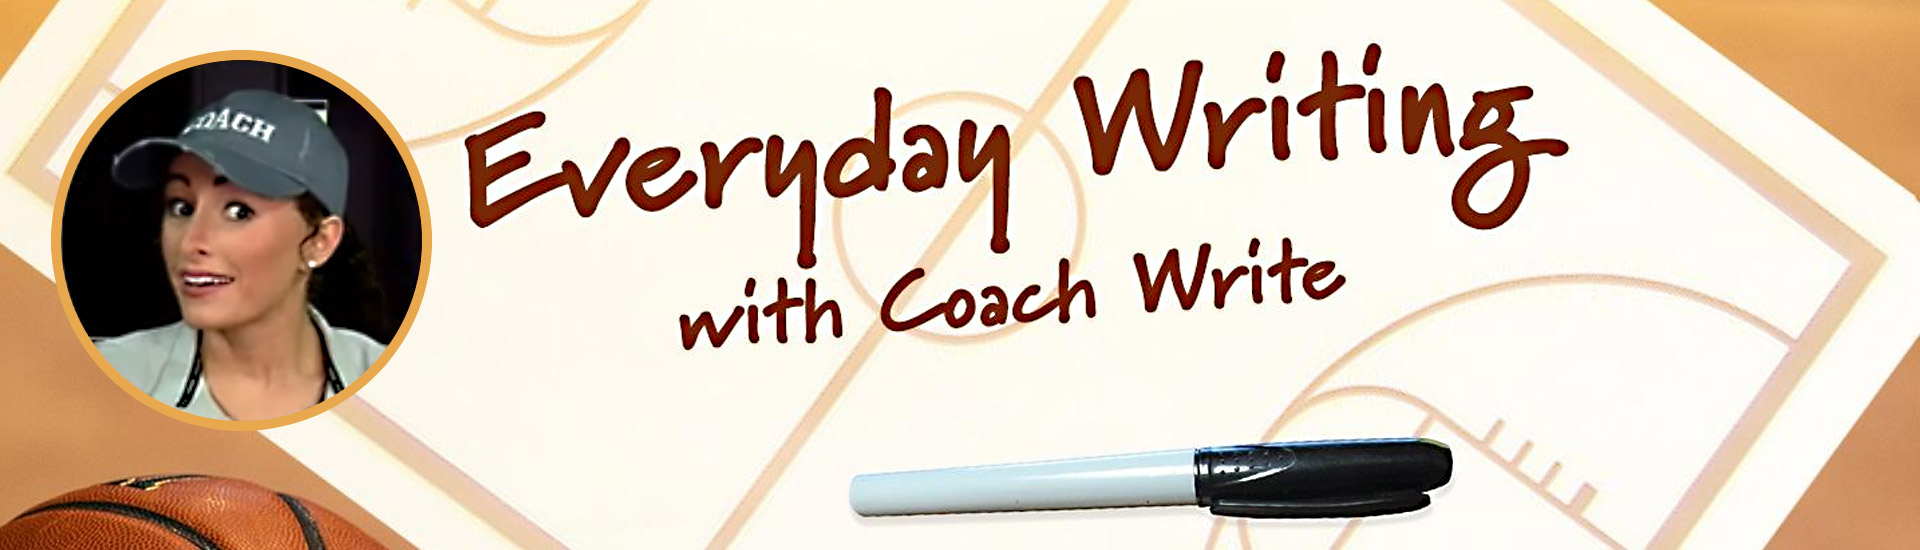 Everyday Writing With Coach Write